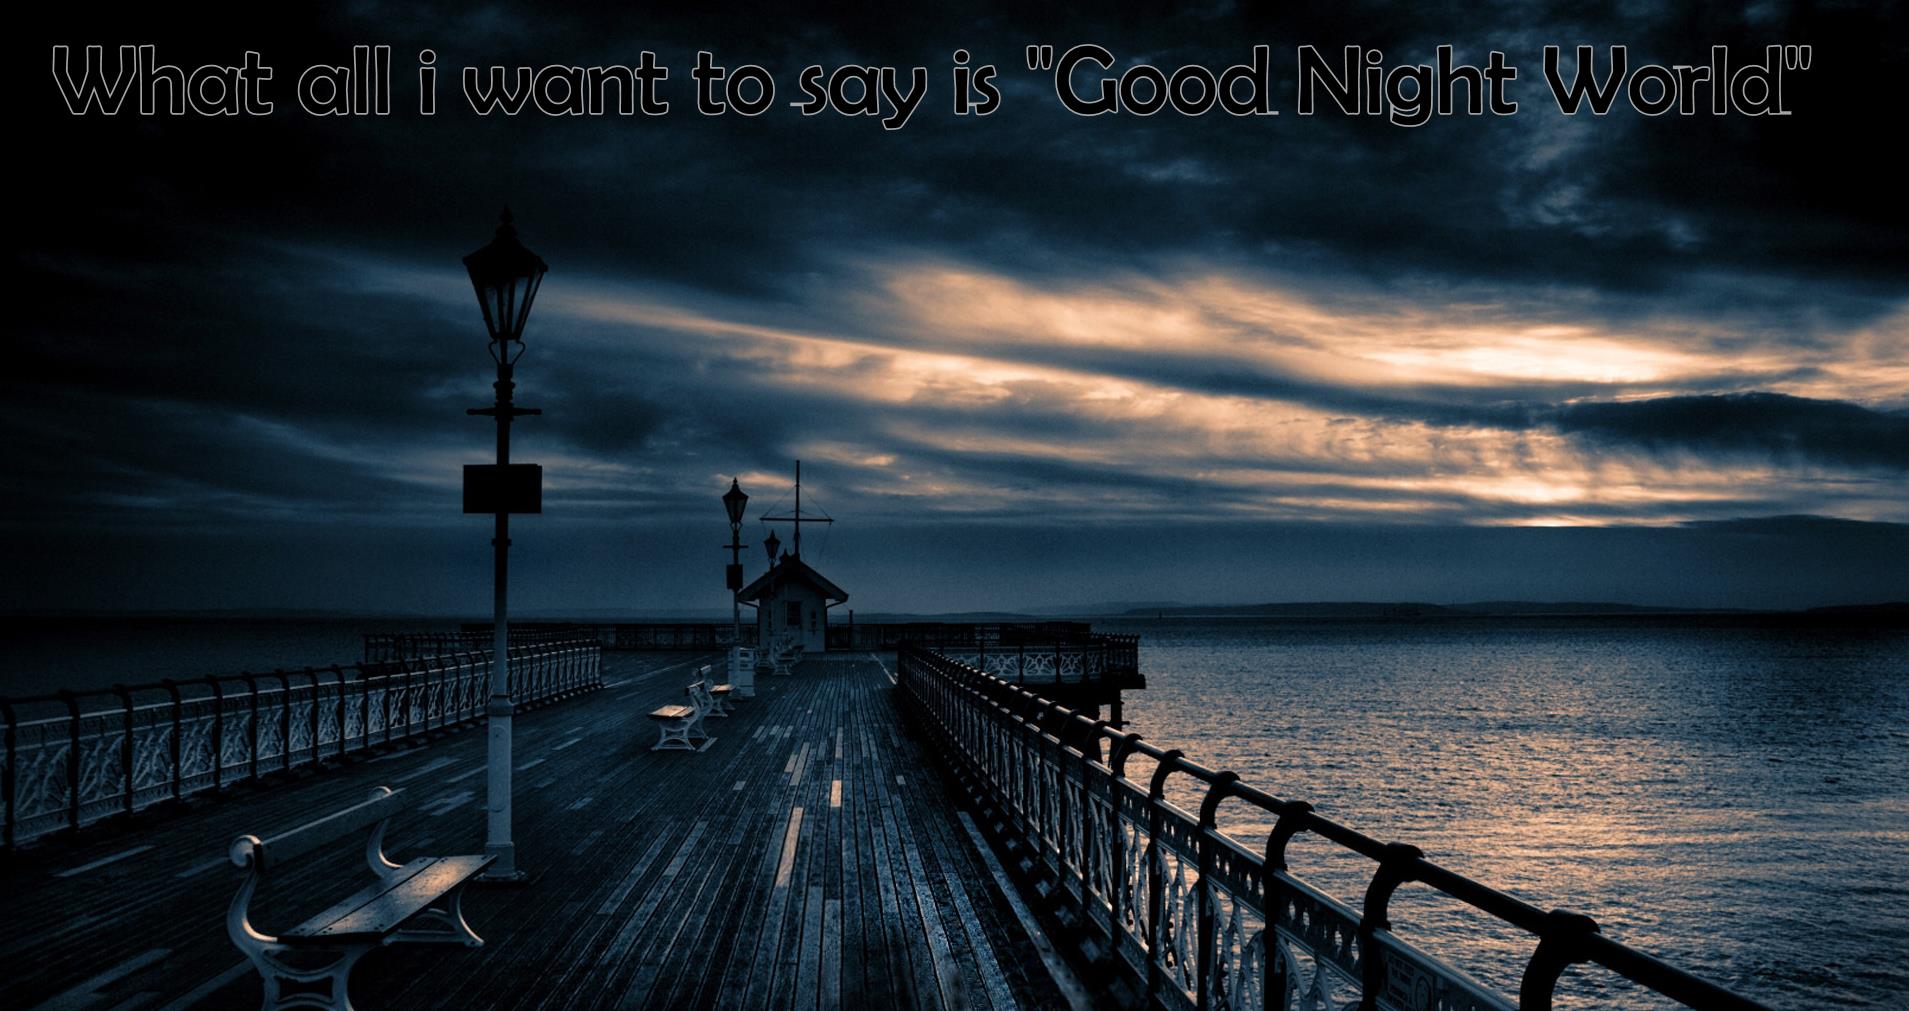 Good Night Message Images wallpaper High Quality